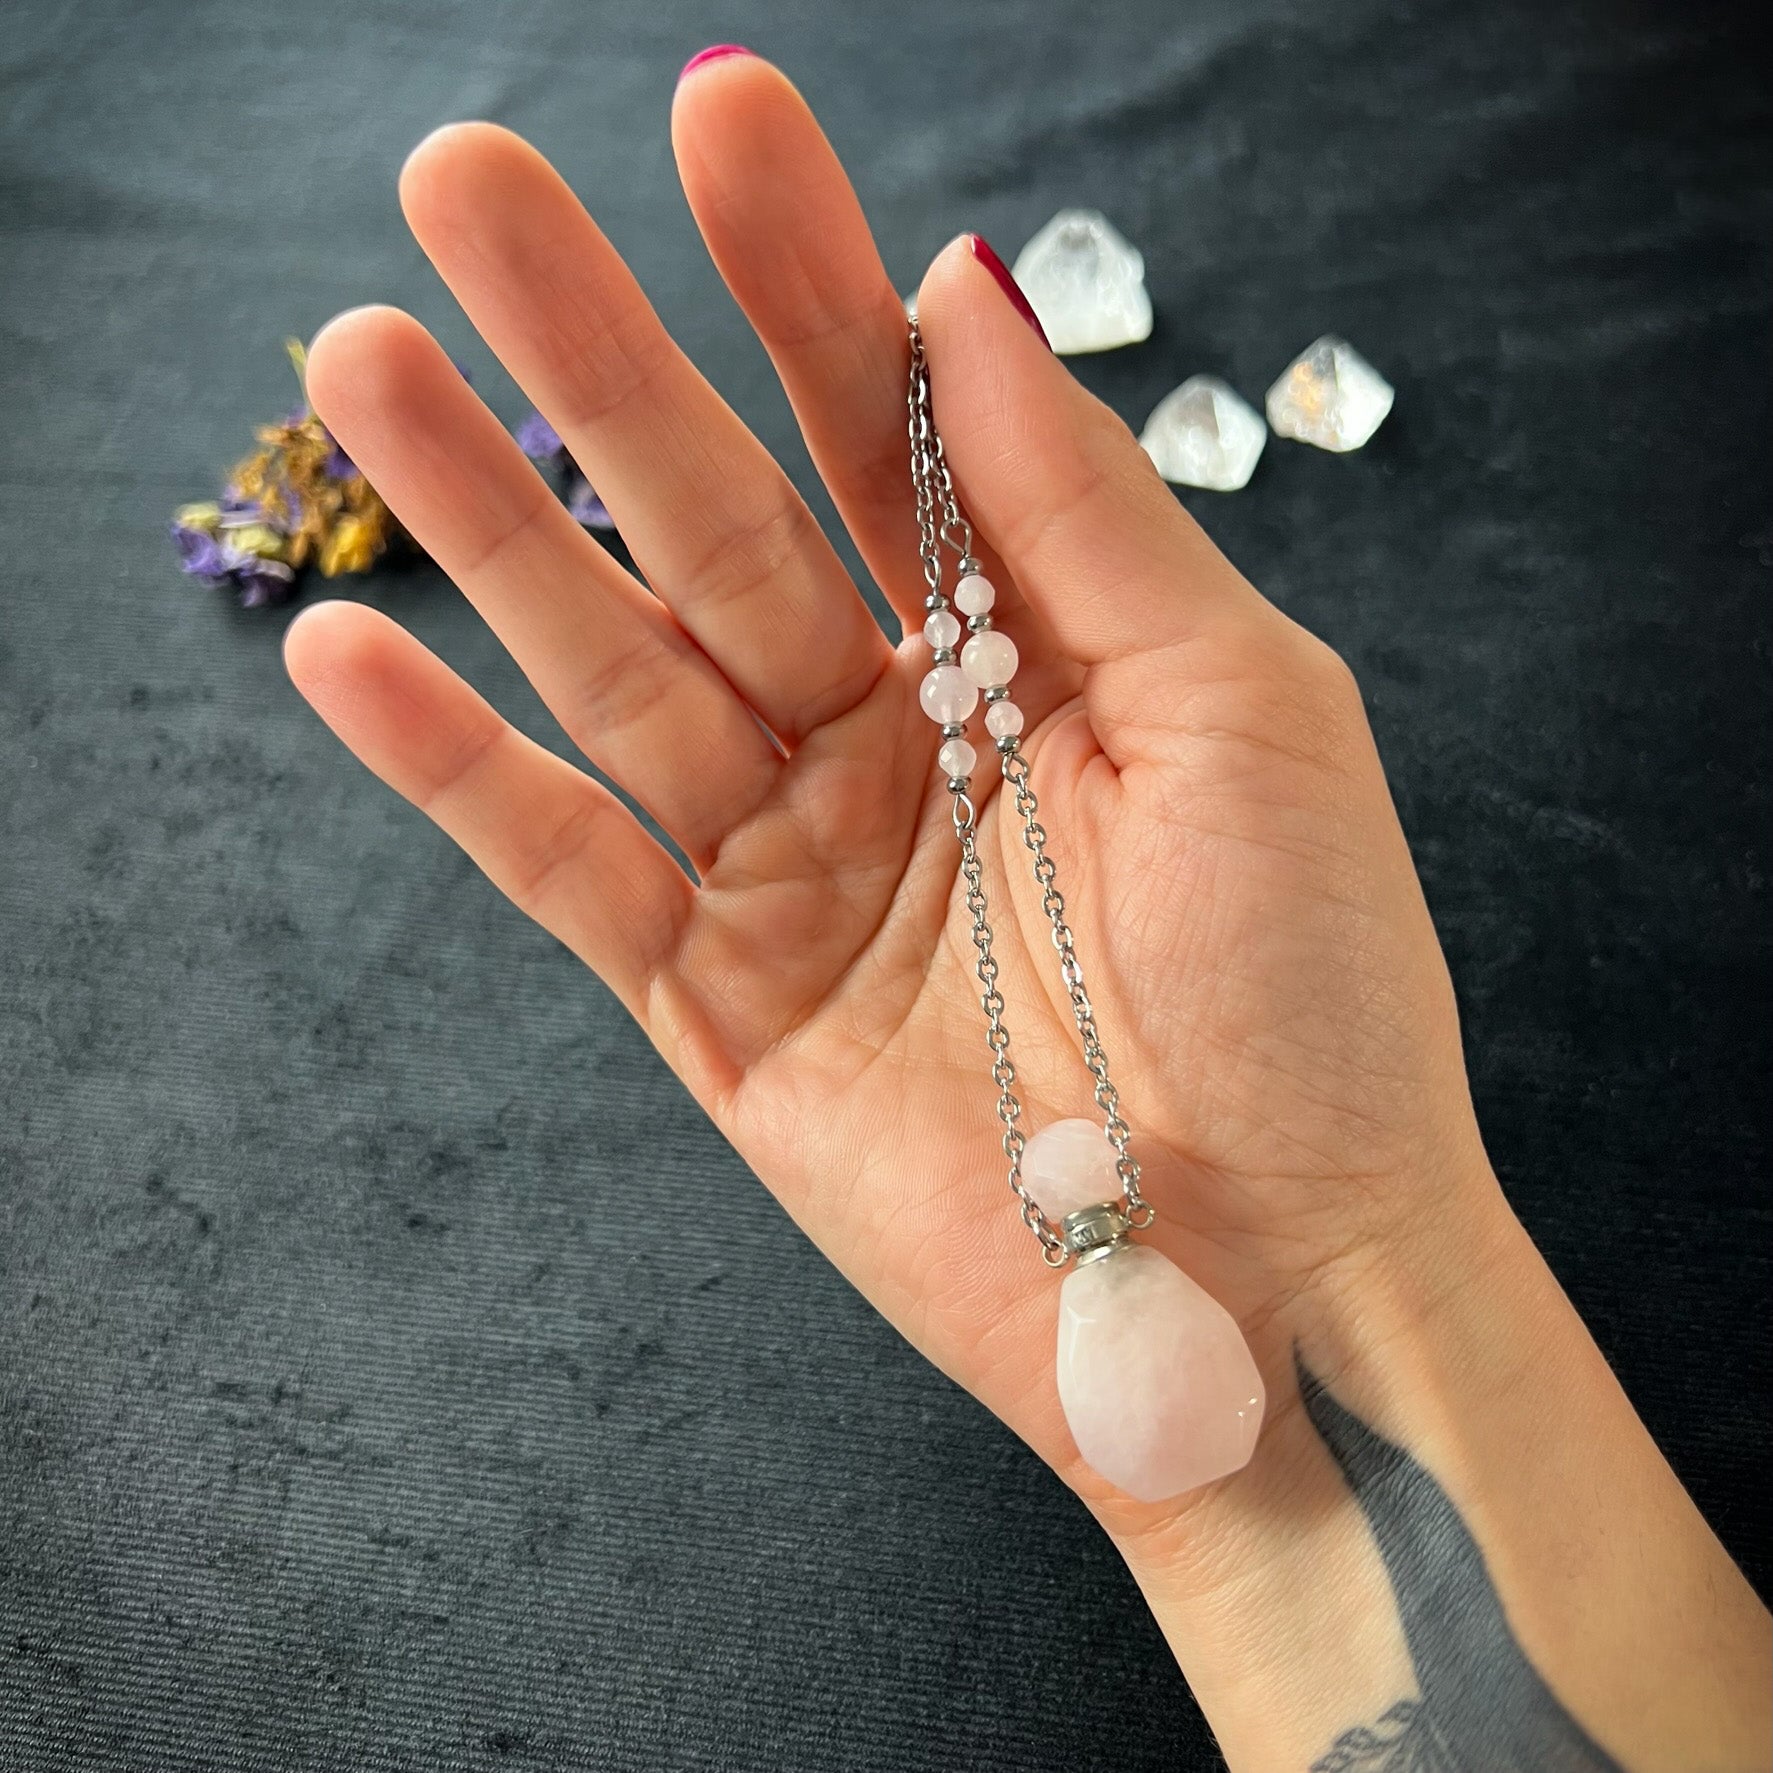 Rose quartz perfume bottle necklace for fragrance, essential oil, potion vial jewelry, gemstone and stainless steel